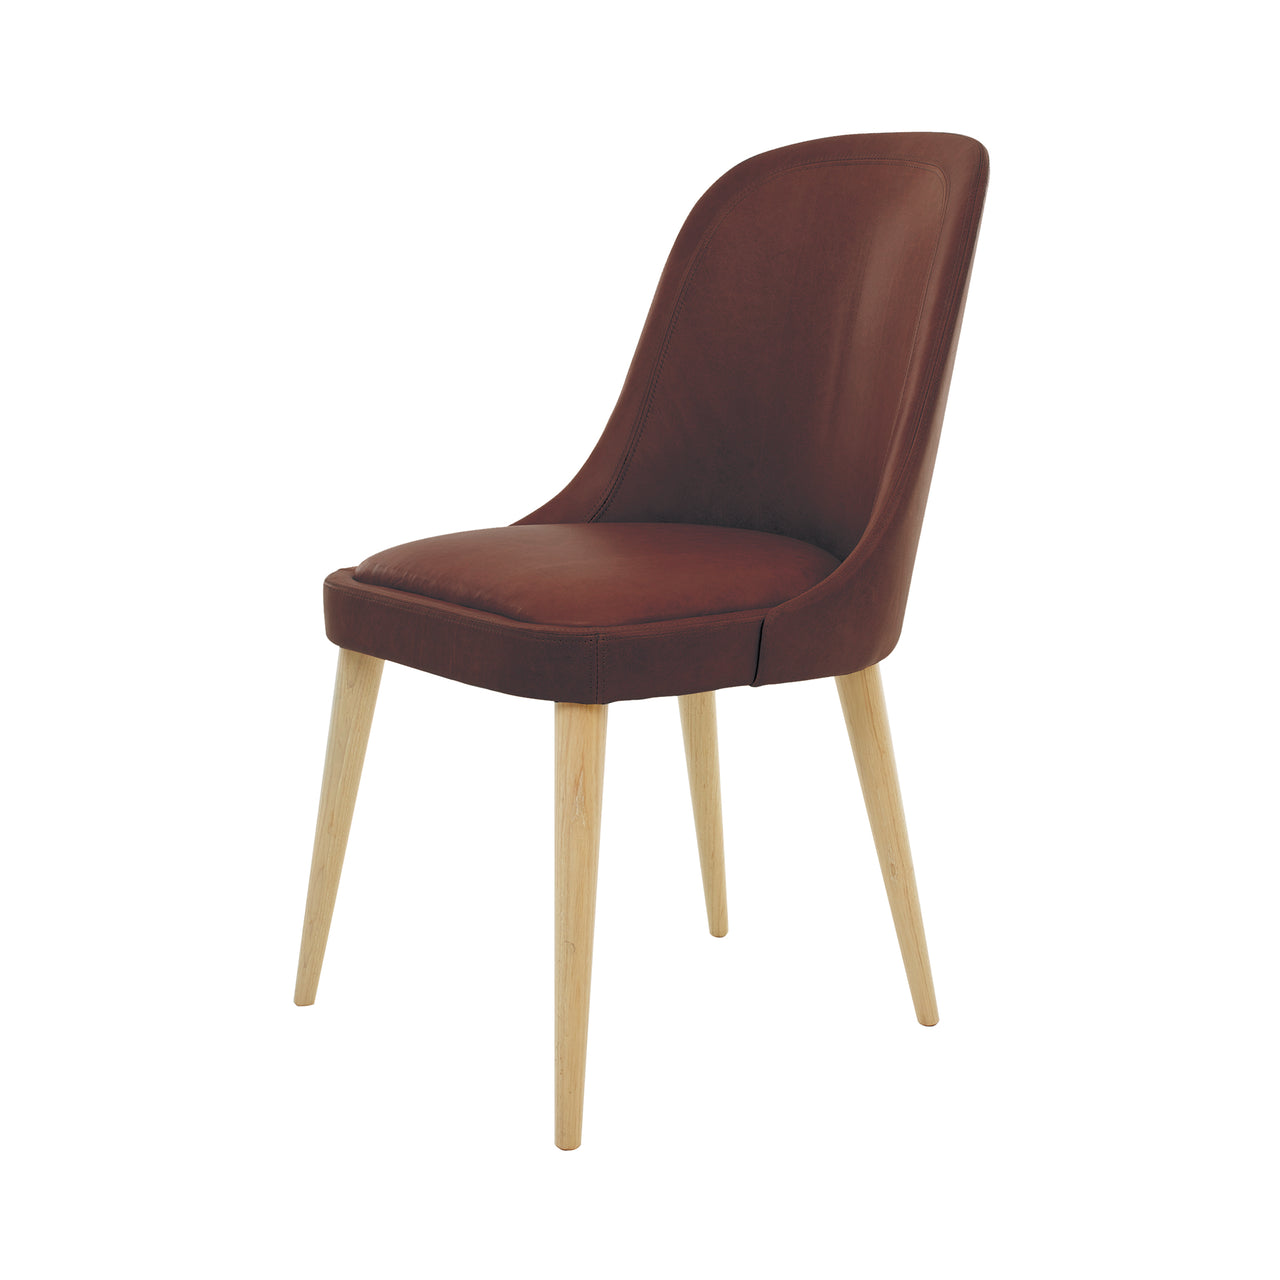 Laval Leather Chair: Natural Oak